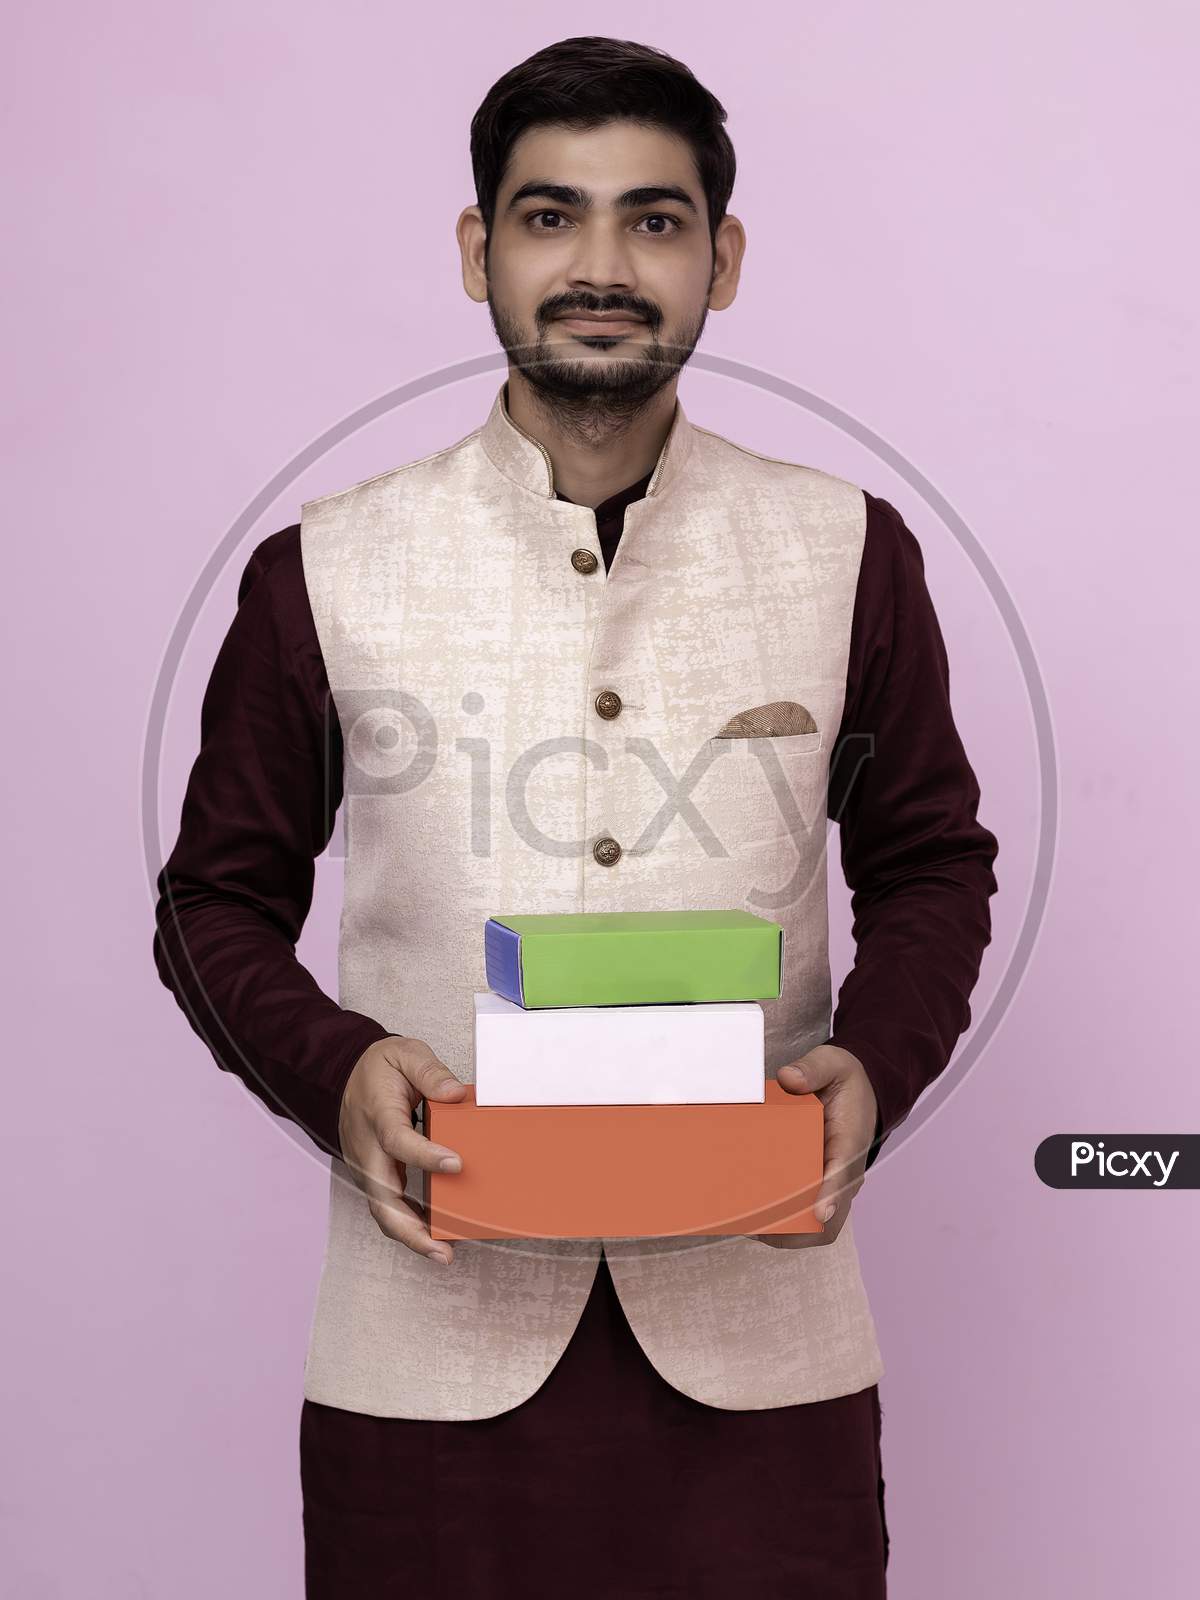 Handsome Indian Man In Traditional Wear Holding Gift Boxes In Hand In Greeting Pose On Isolated Background.